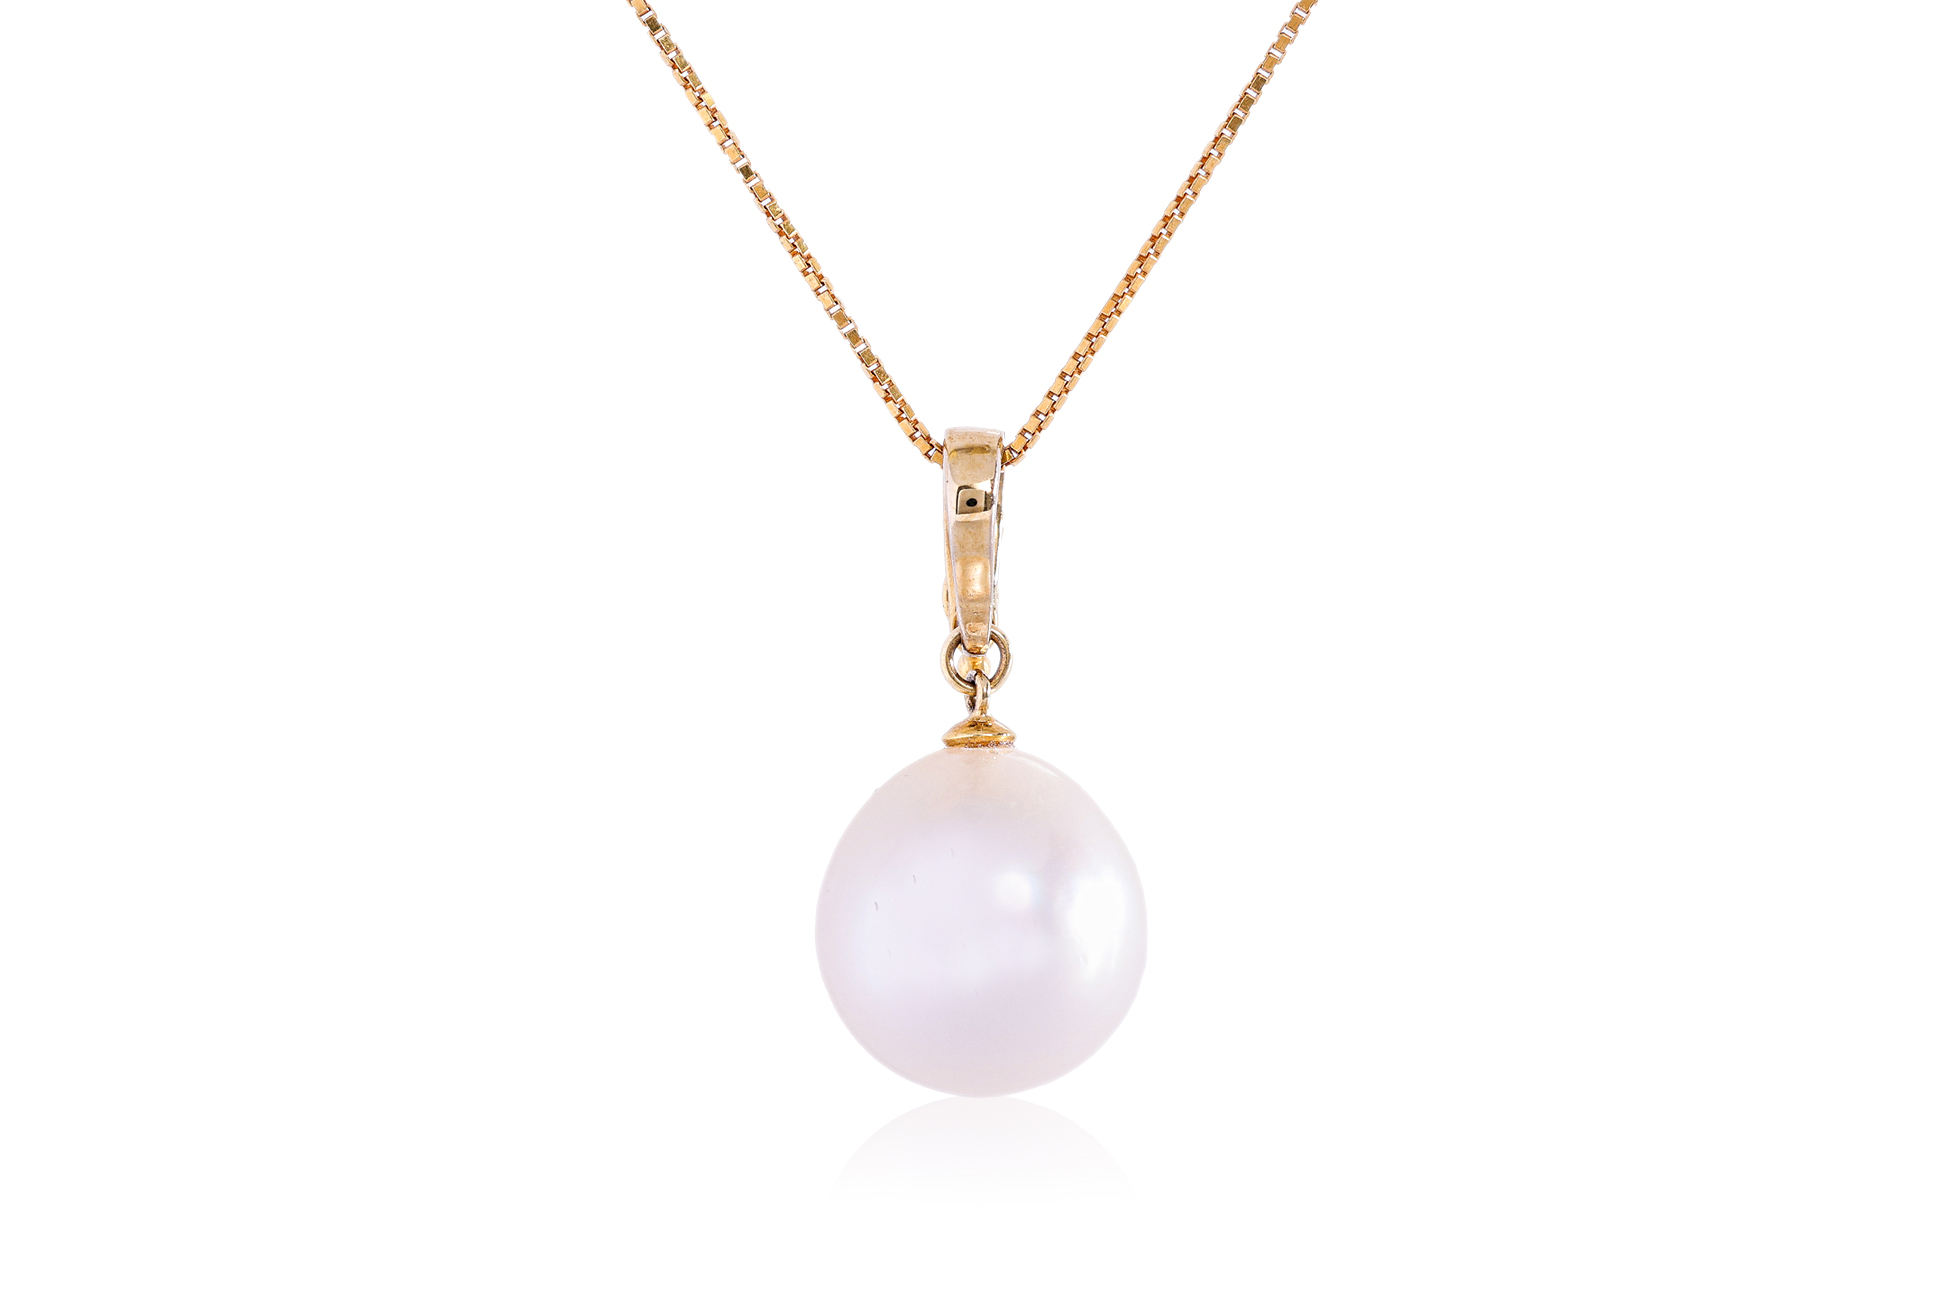 AN OFF-ROUND CULTURED SOUTH SEA PEARL PENDANT ON CHAIN